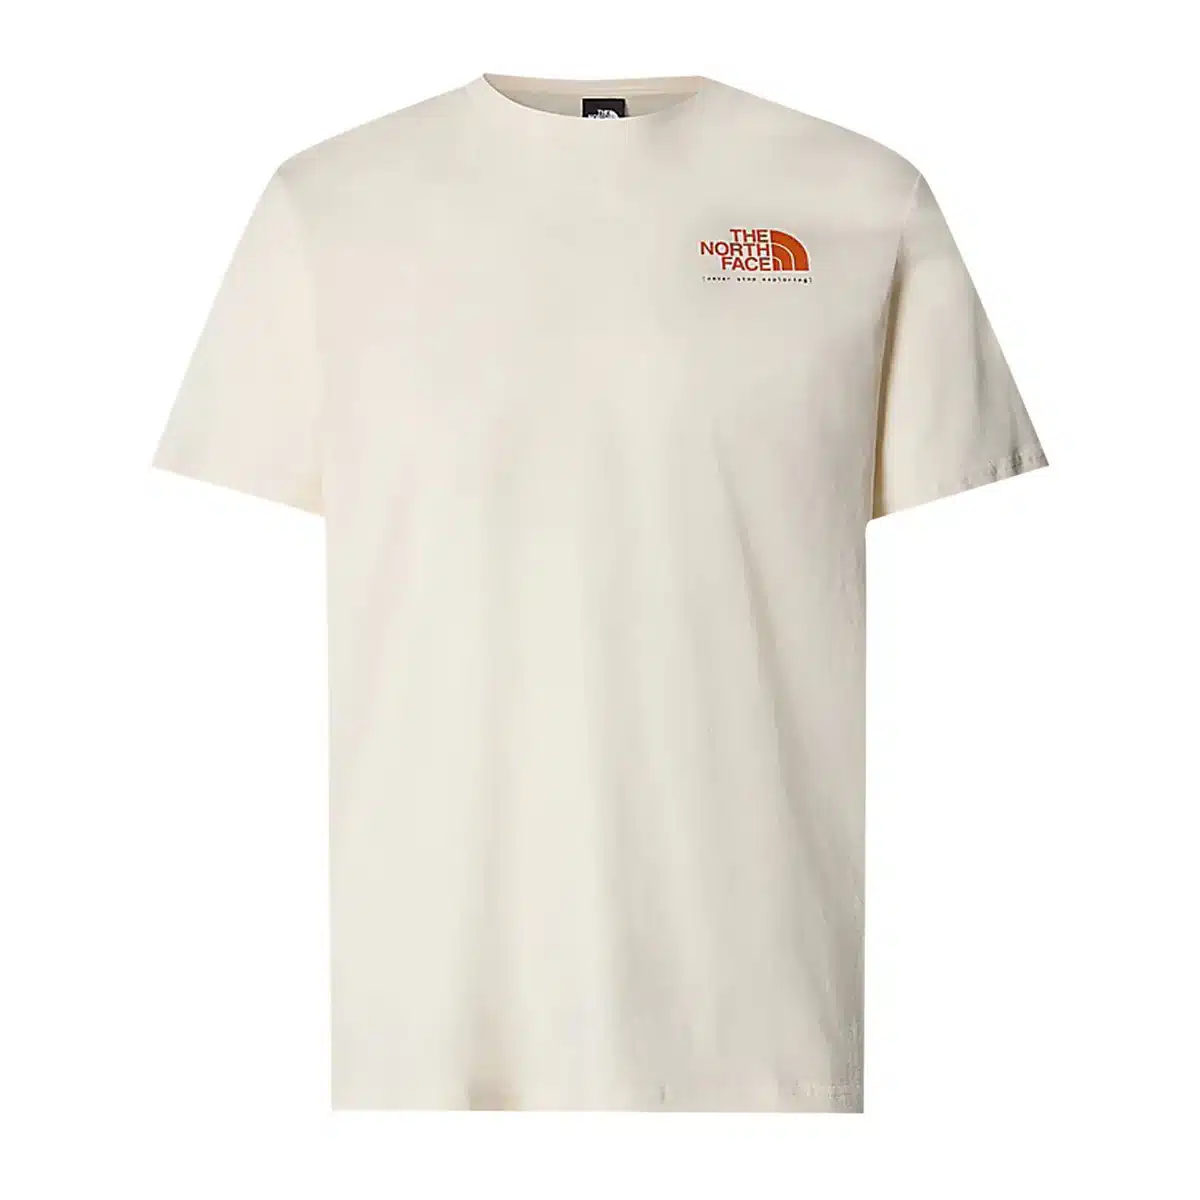 THE NORTH FACE – T-SHIRT GRAPHIC 3